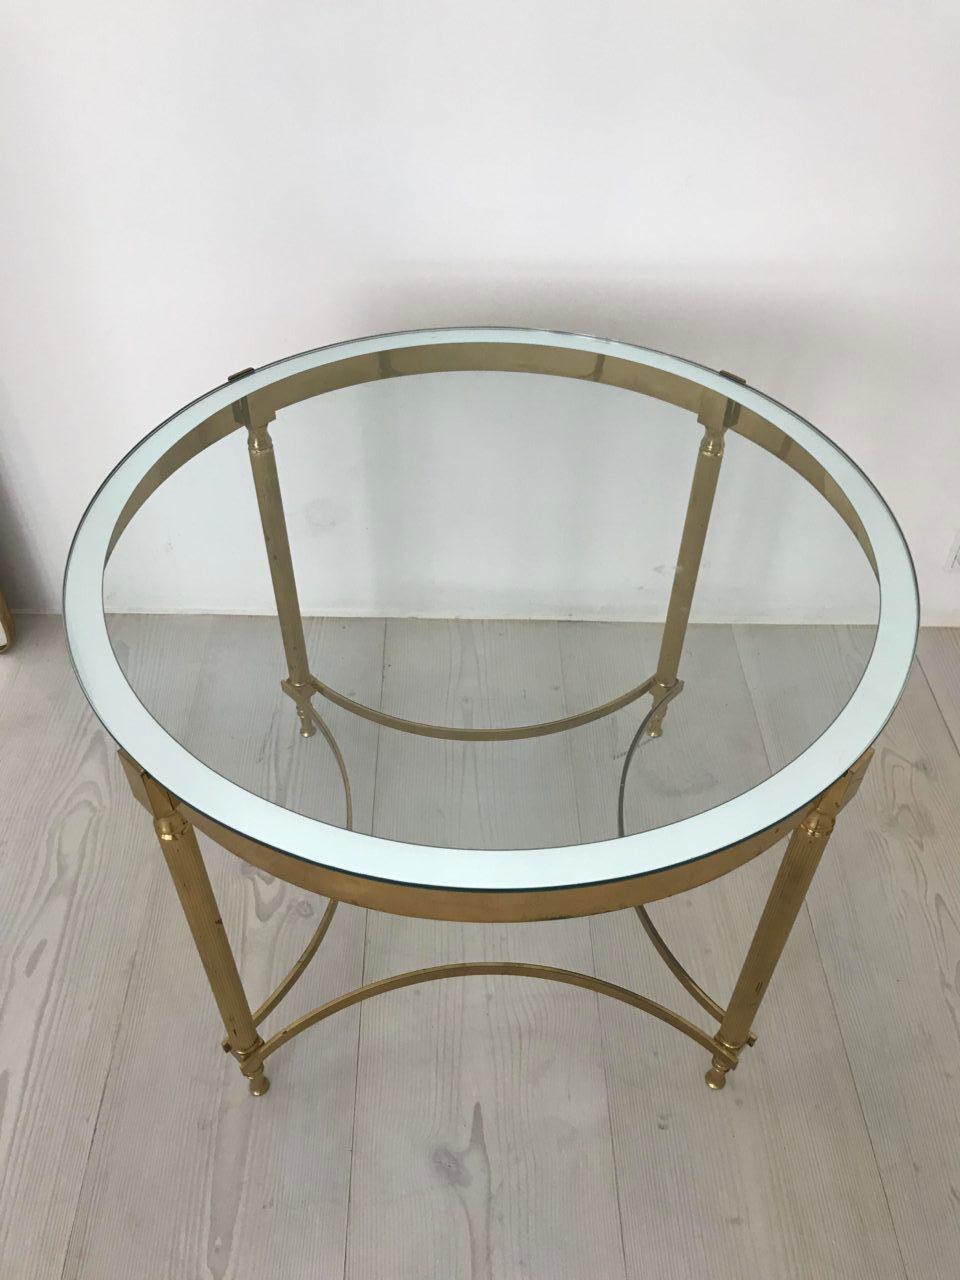 Sophisticated and beautiful tall circular coffee / lamp table. Made in brass, and from 1960s France. Elegantly made with a sleek brass frame holding a solid quality glass top with a mirrored edge giving a lovely finish, and standing on fluted